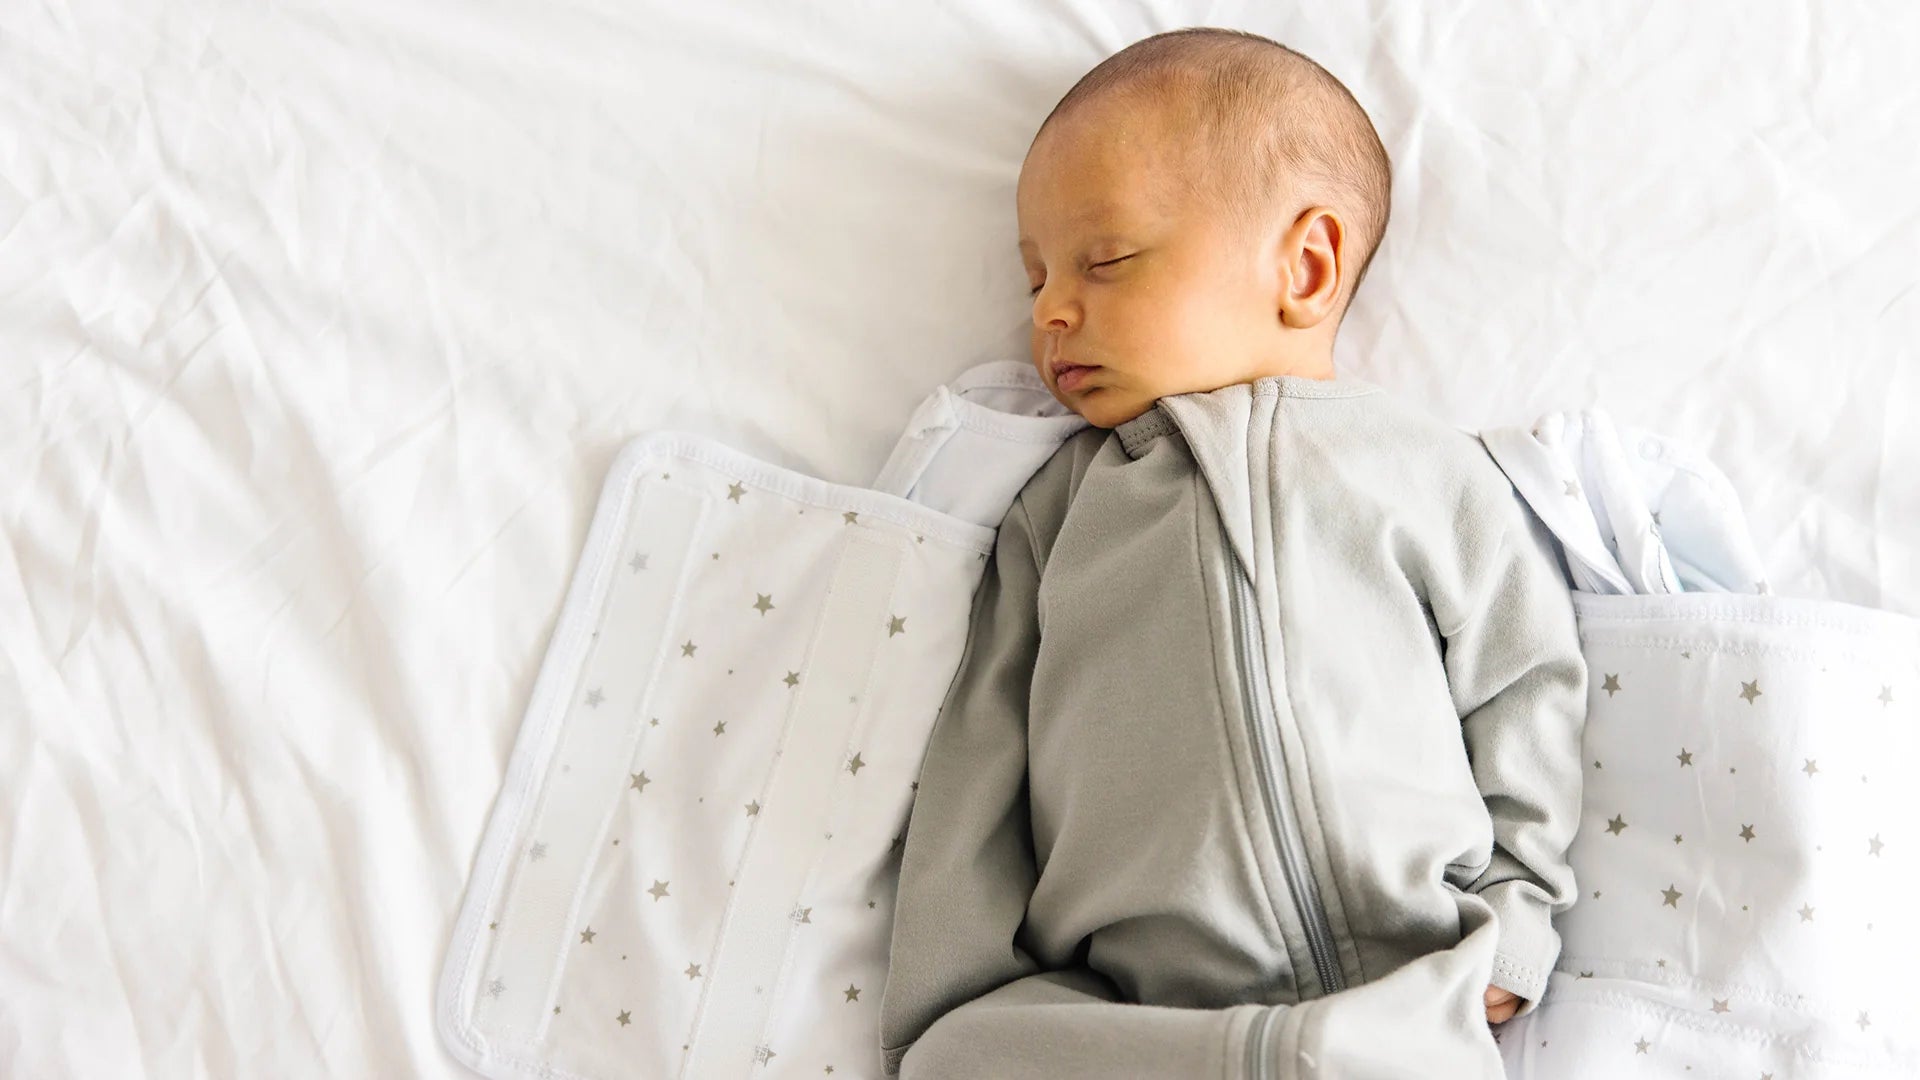 When Can My Baby Sleep Through The Night Without a Feeding?